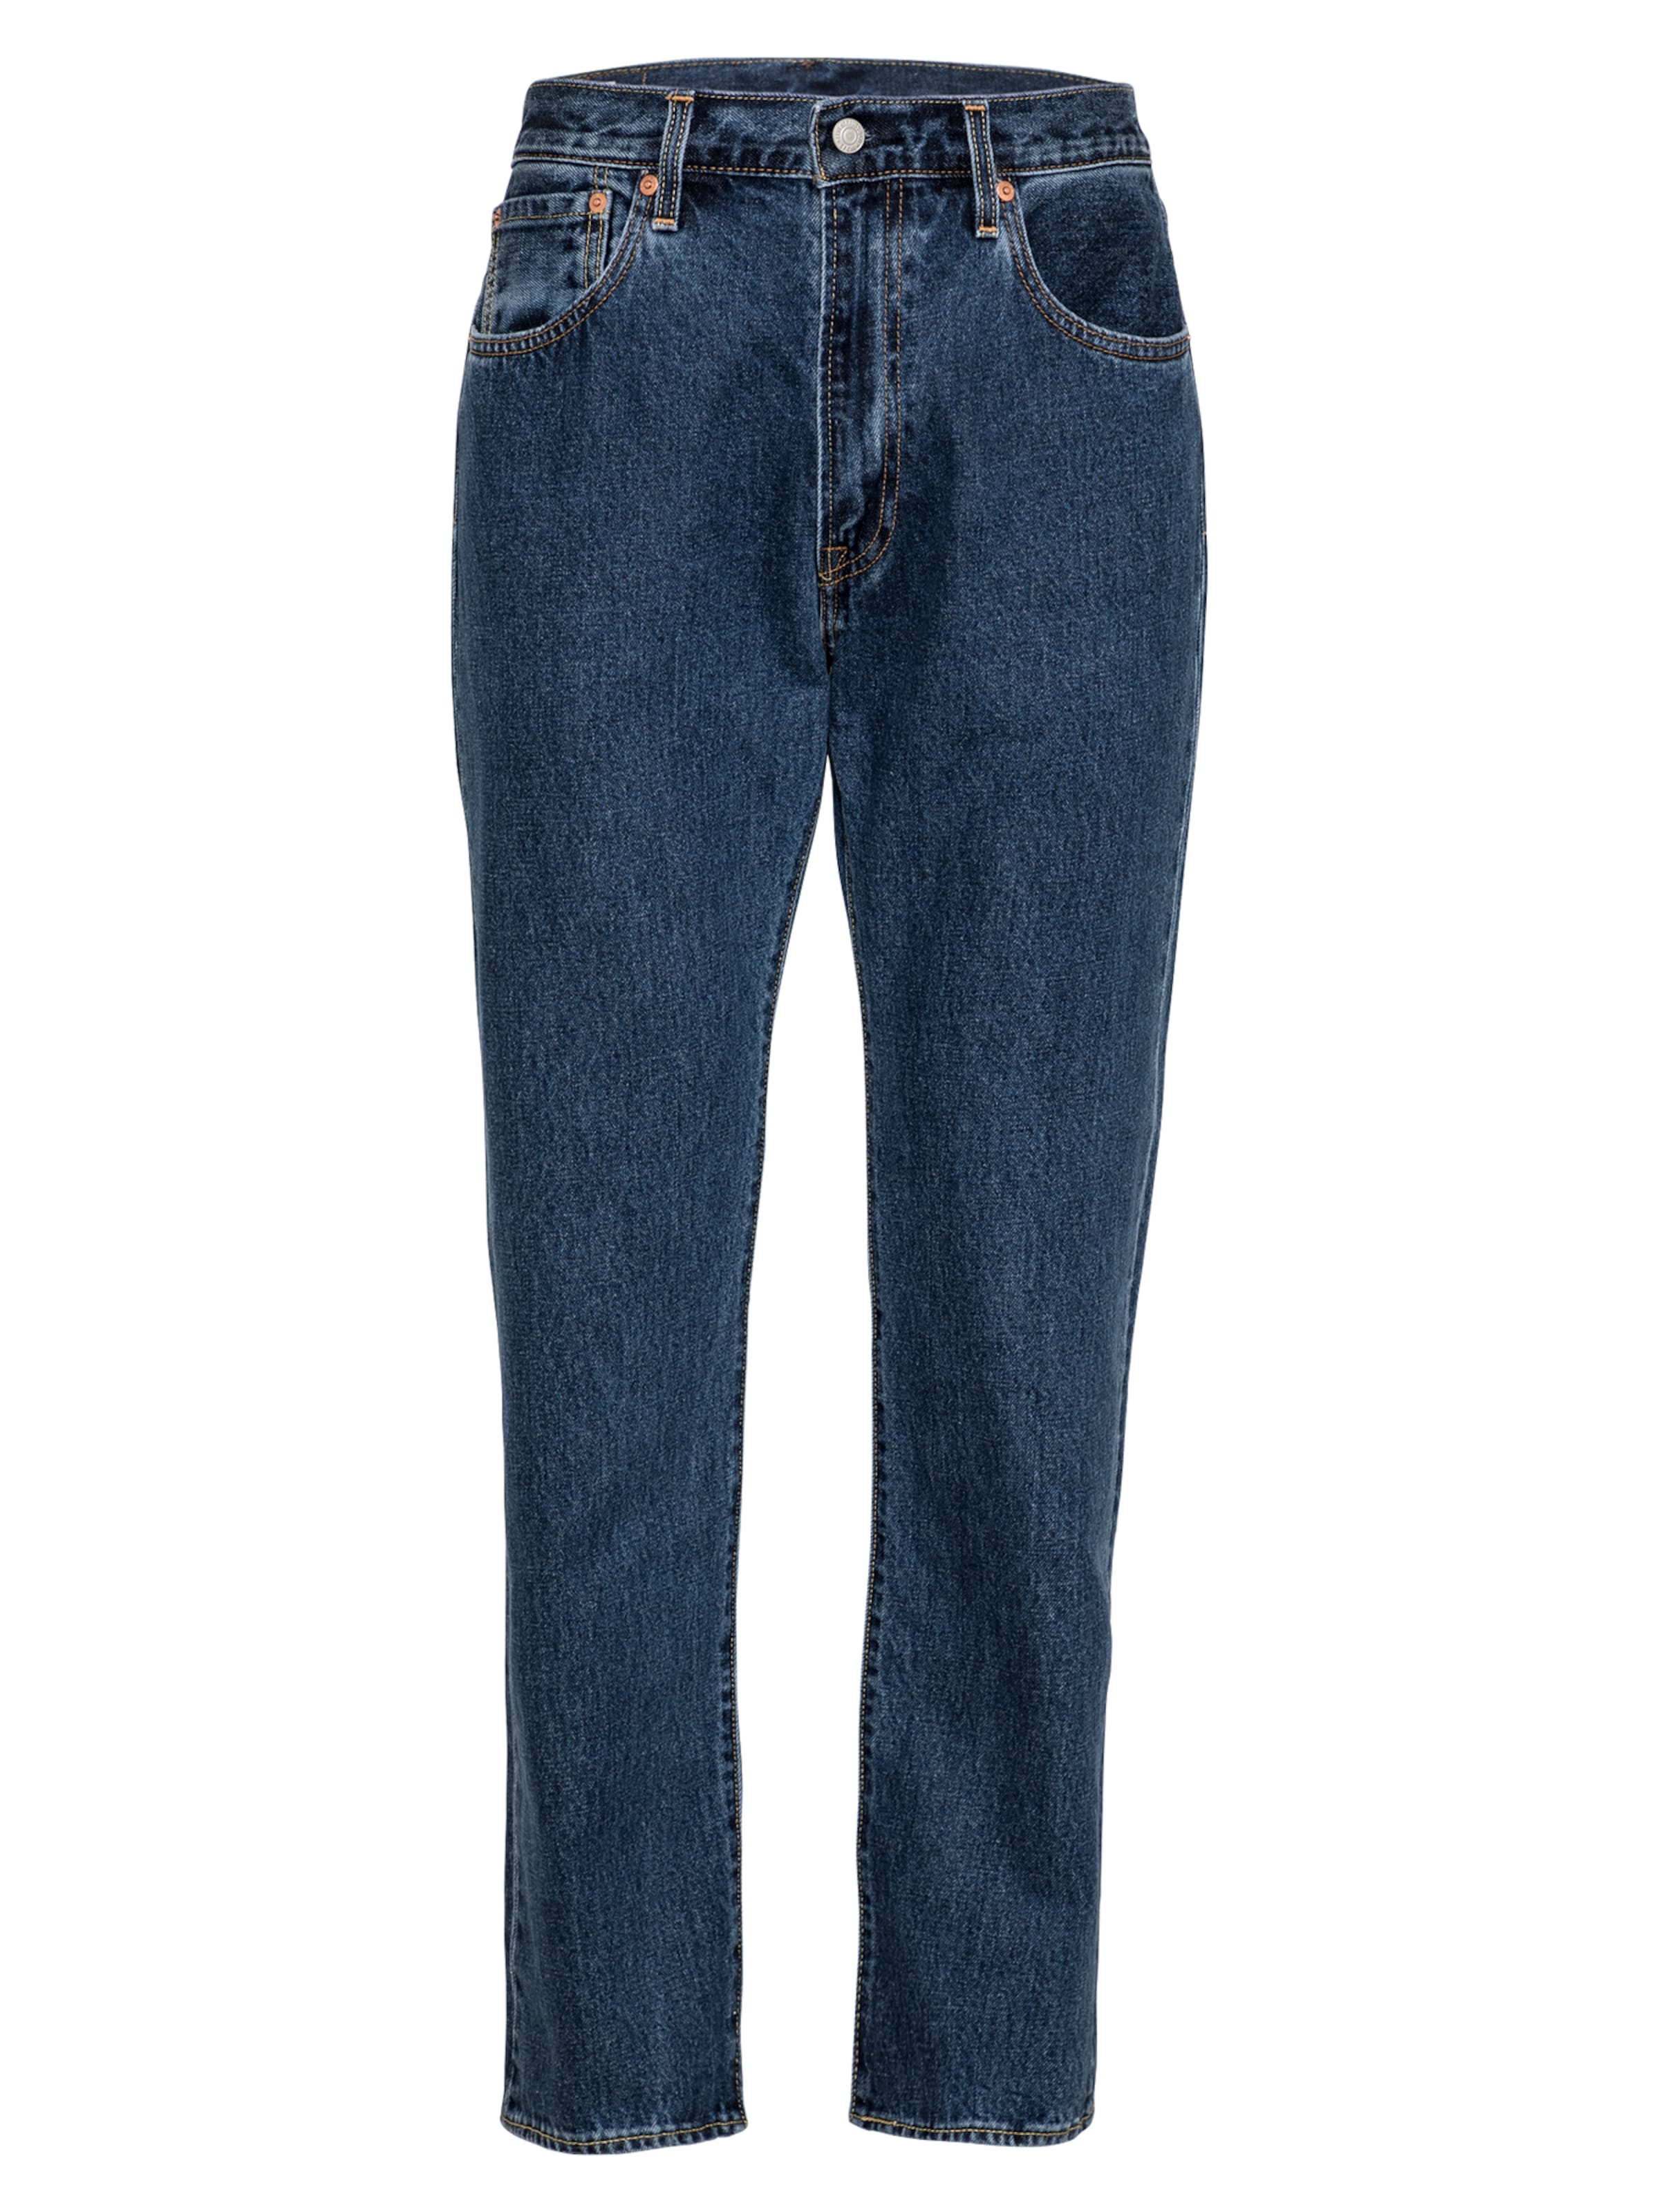 Uomo jsOCi LEVIS Jeans Authentic in Blu 